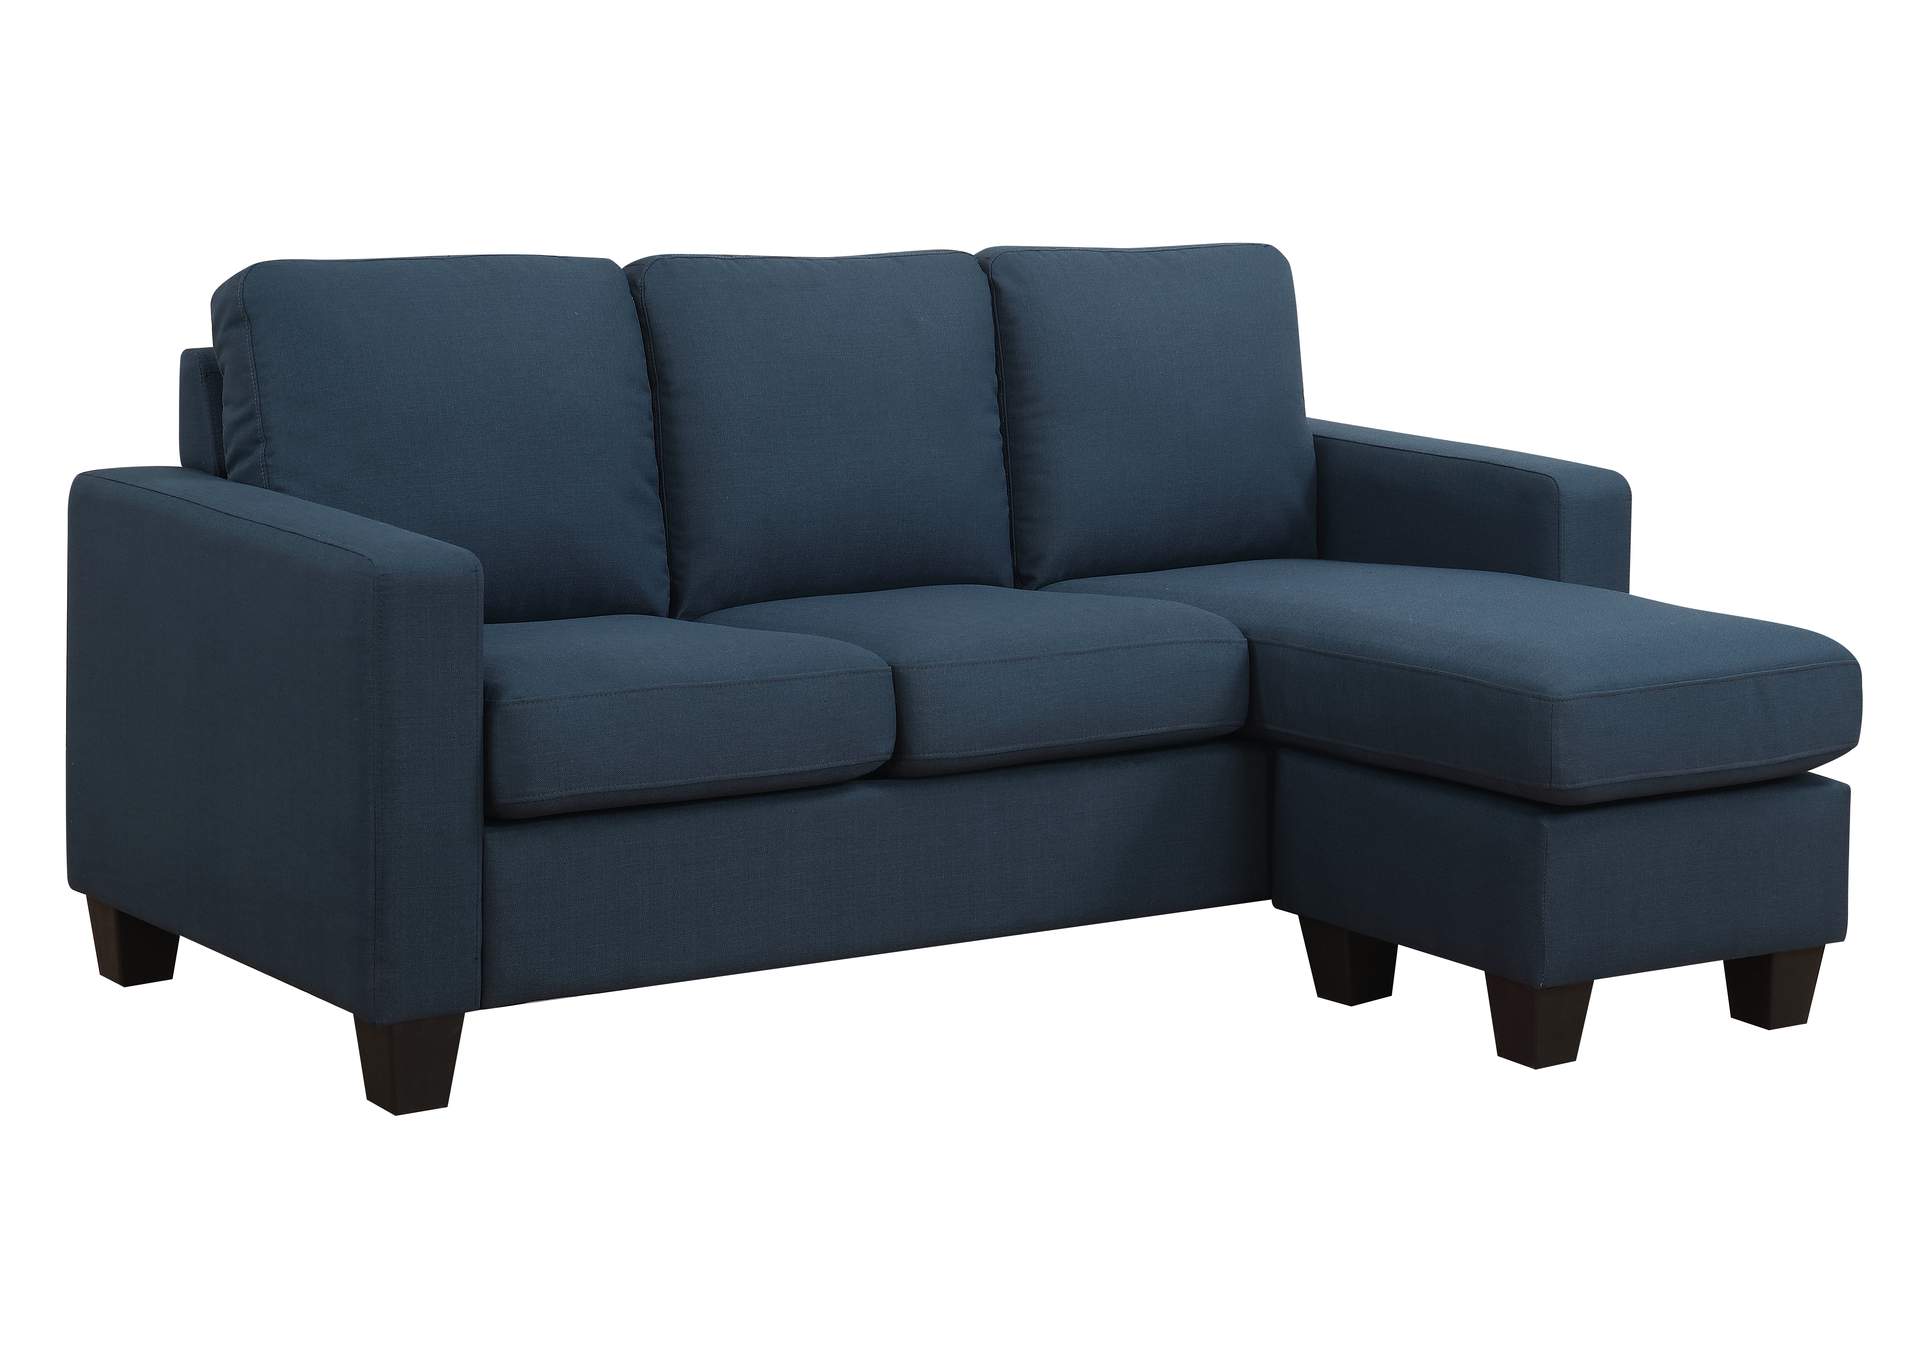 Nix Reconfigurable Chaise Sectional,Emerald Home Furnishings